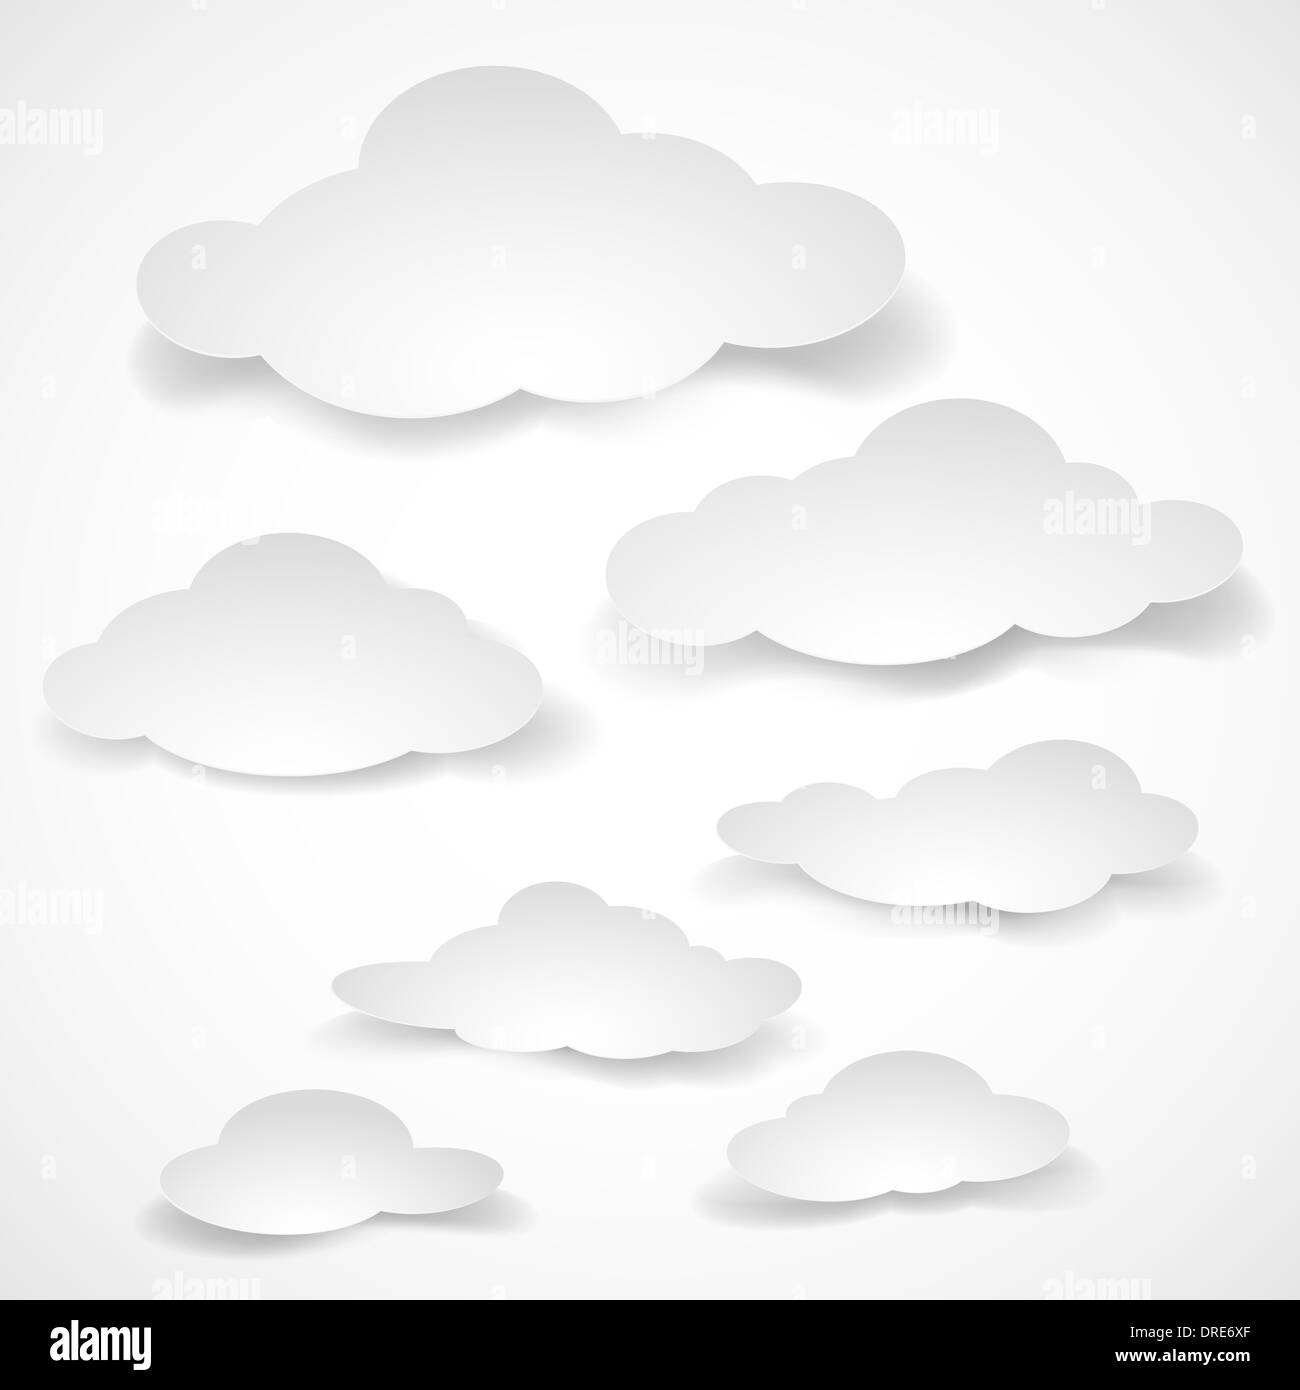 Cut paper Black and White Stock Photos & Images - Alamy